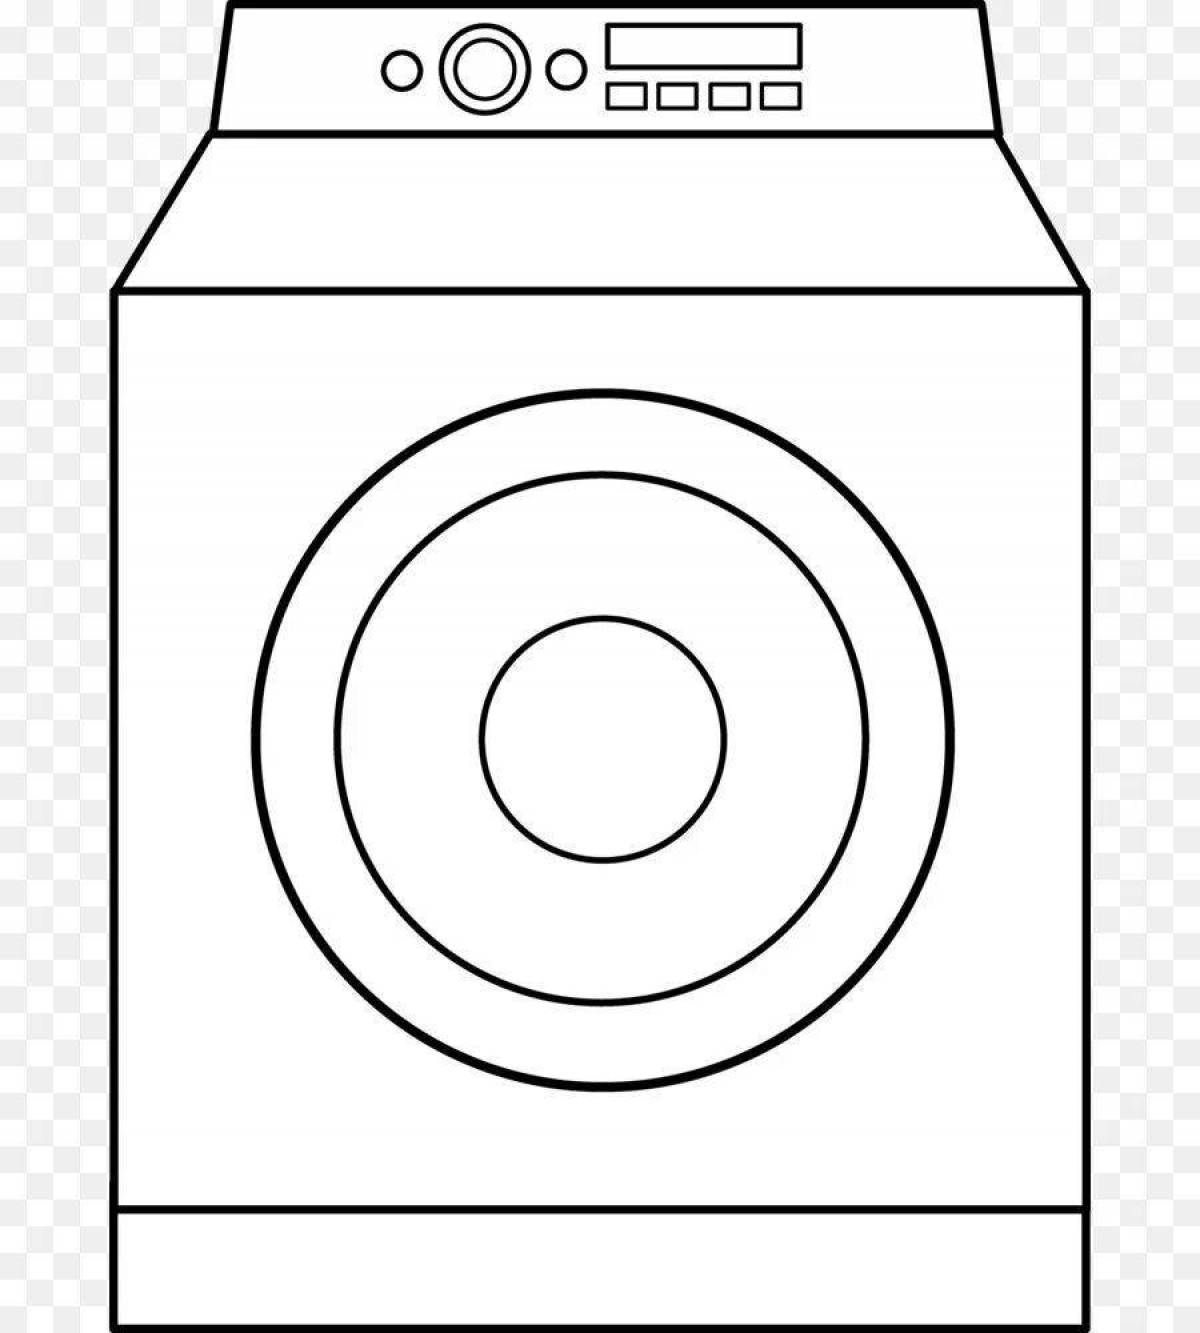 Attractive coloring of household appliances for kindergarten